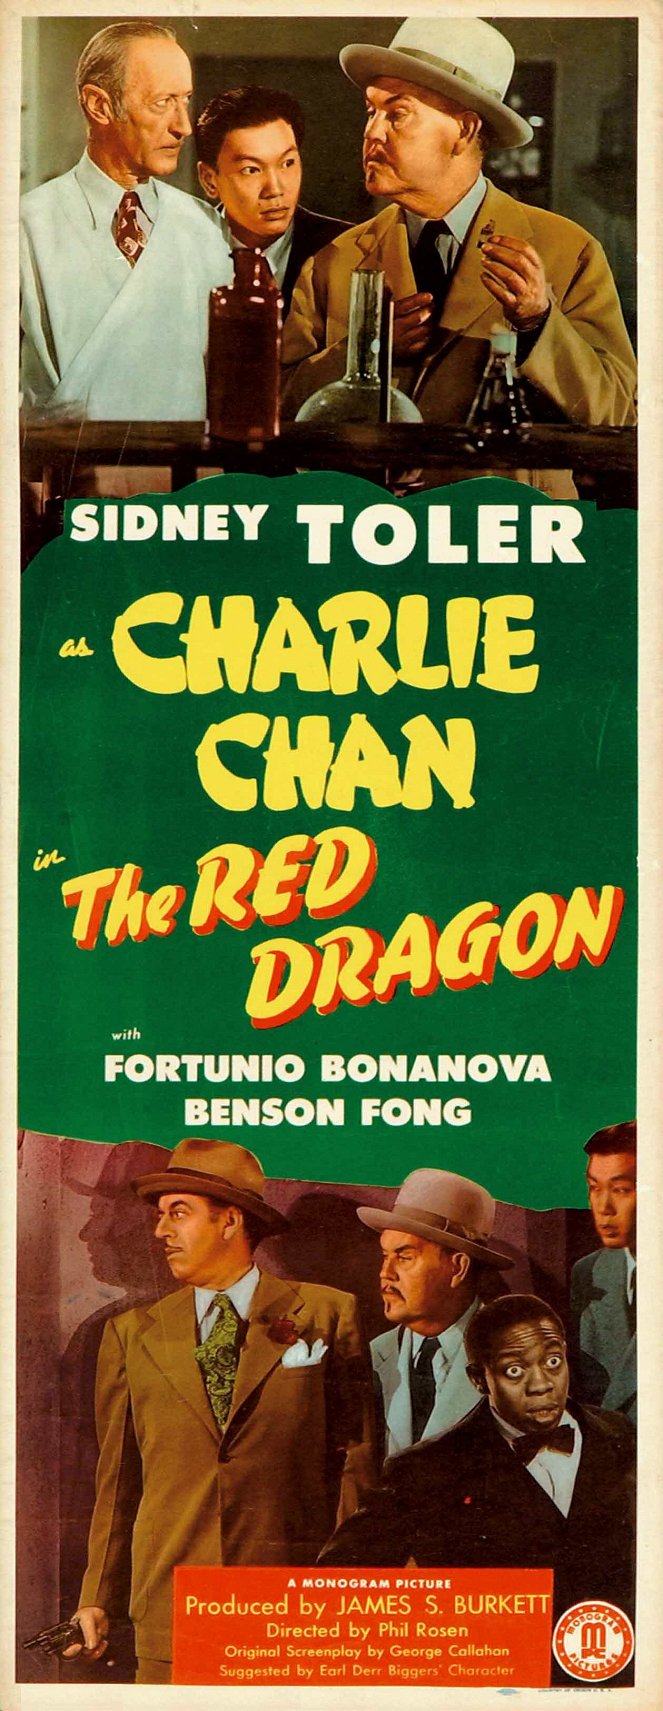 The Red Dragon - Posters